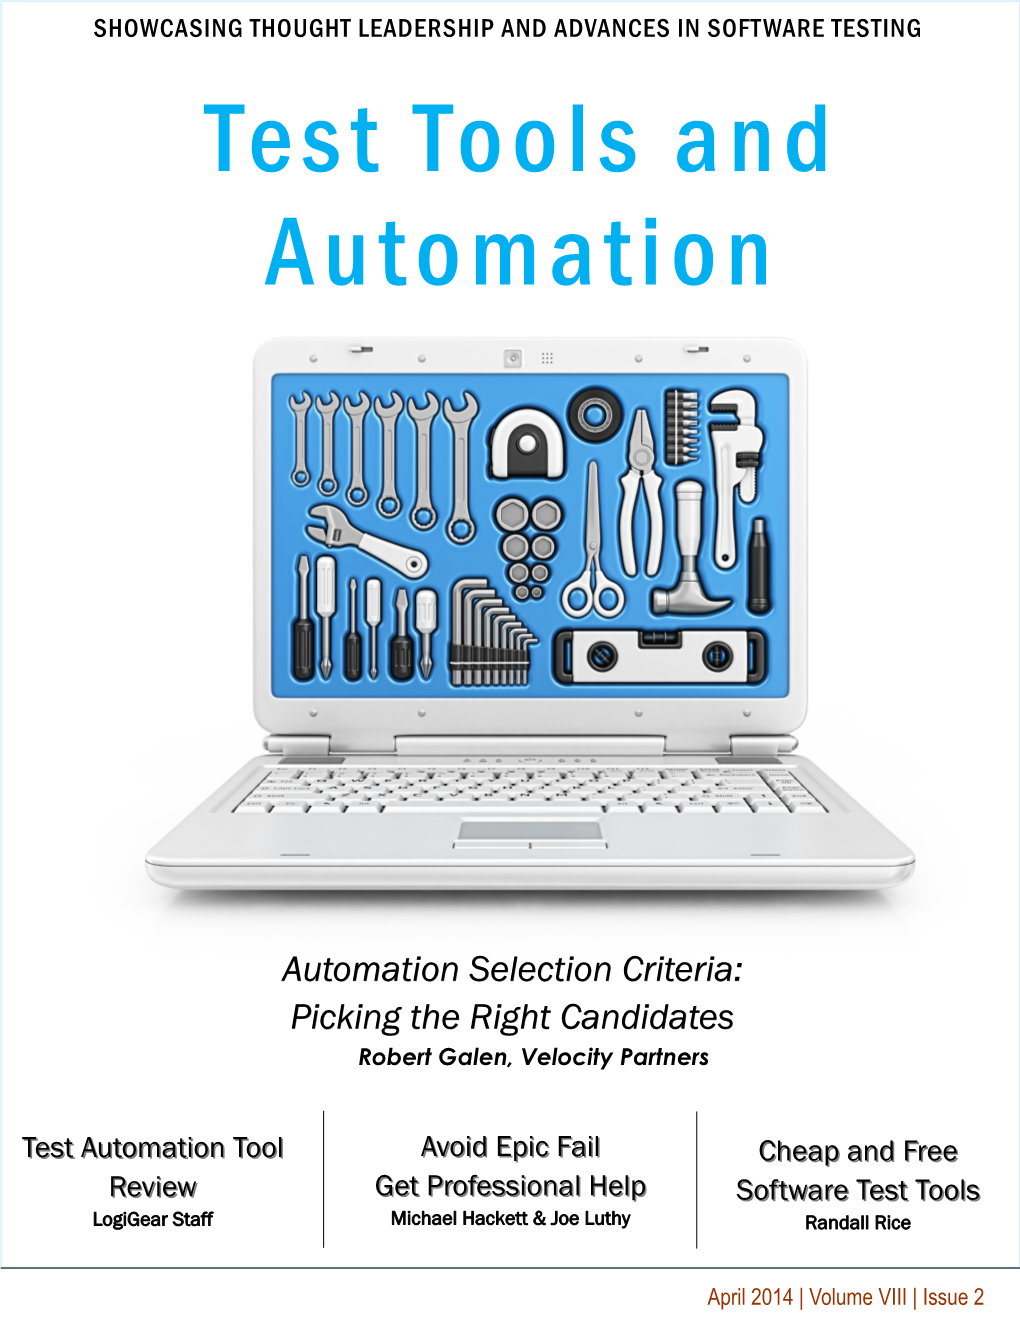 Test Tools and Automation